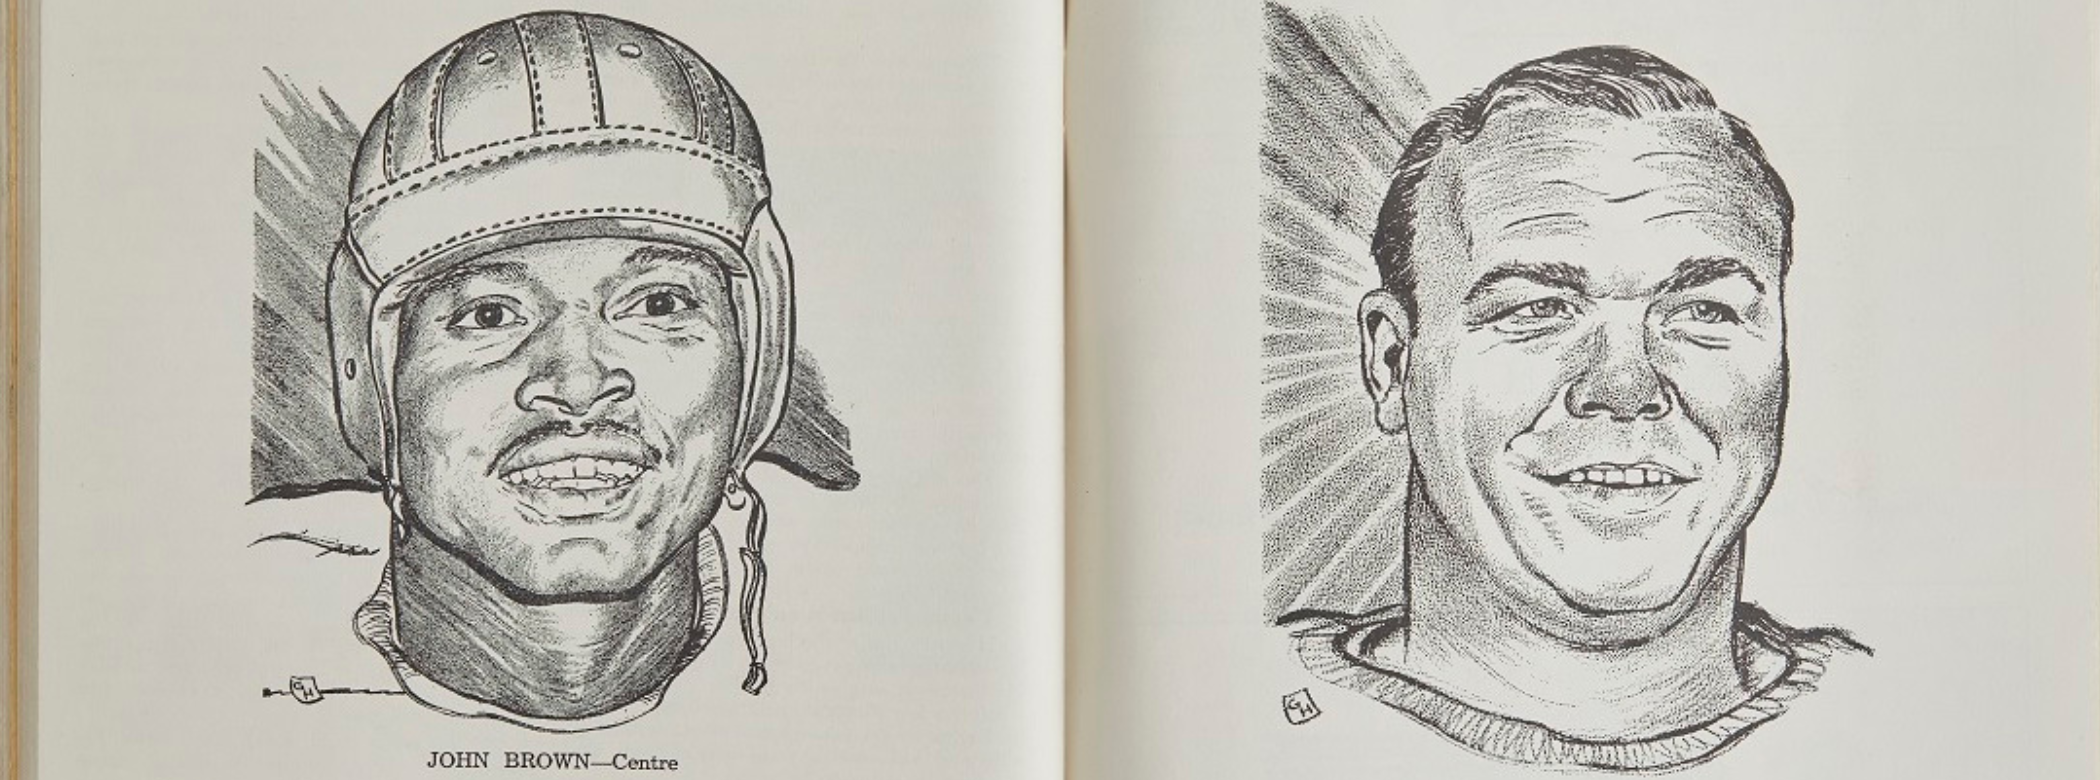 Sketches of two Winnipeg football players from the 1952 programme.